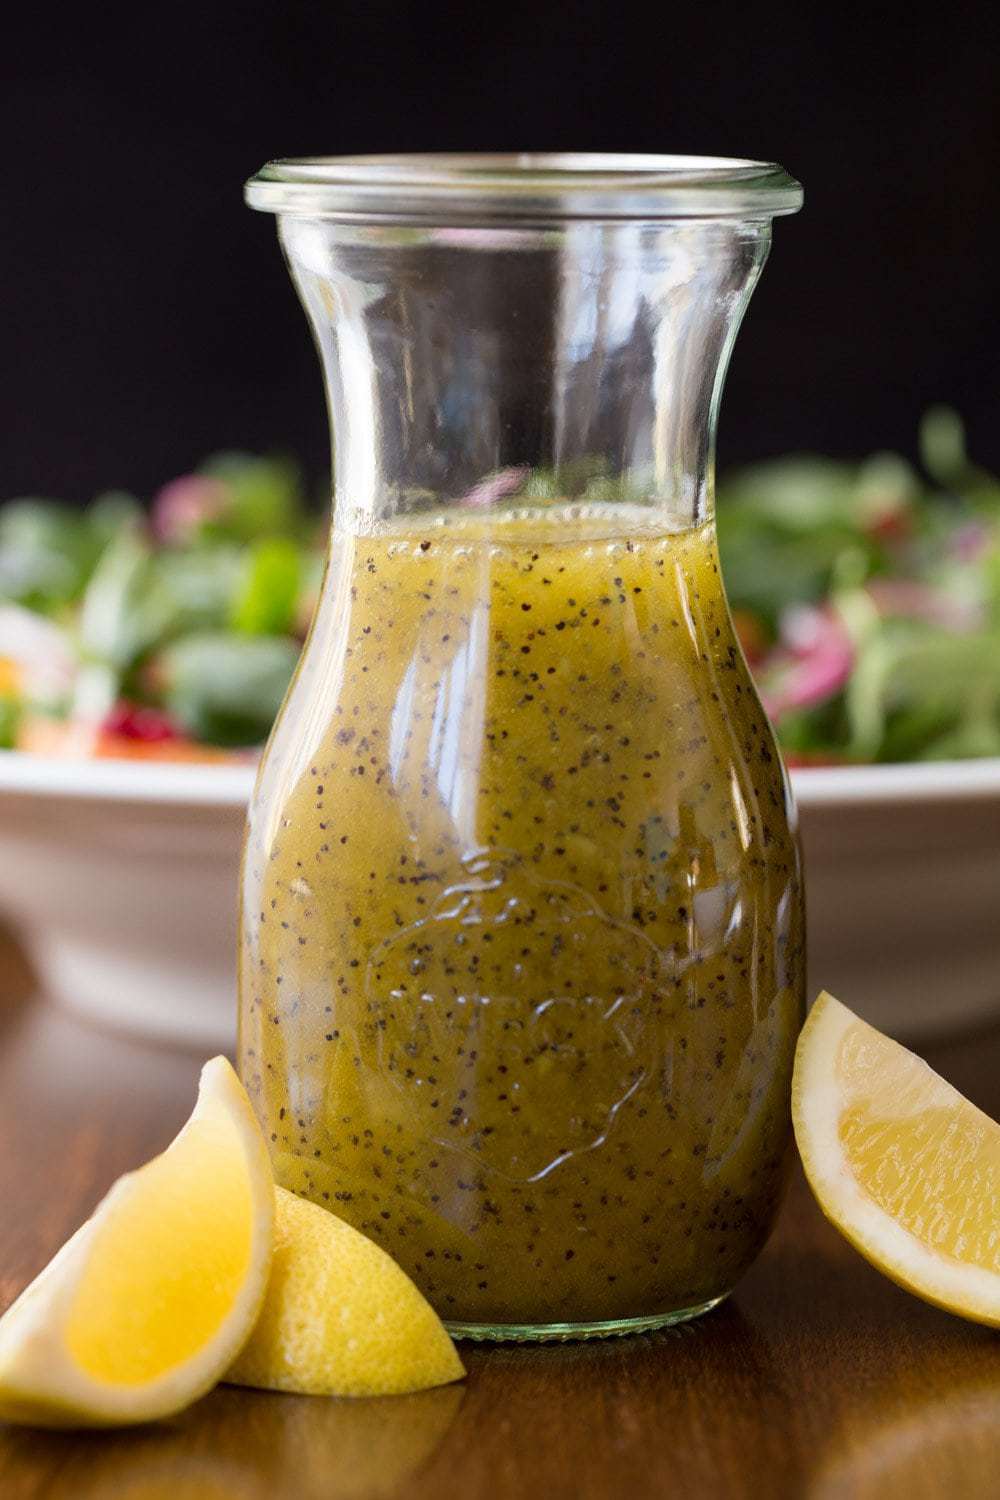 Vertical picture of Lemon Ginger Salad Dressing in a glass jar with fresh lemons and a green salad in the background